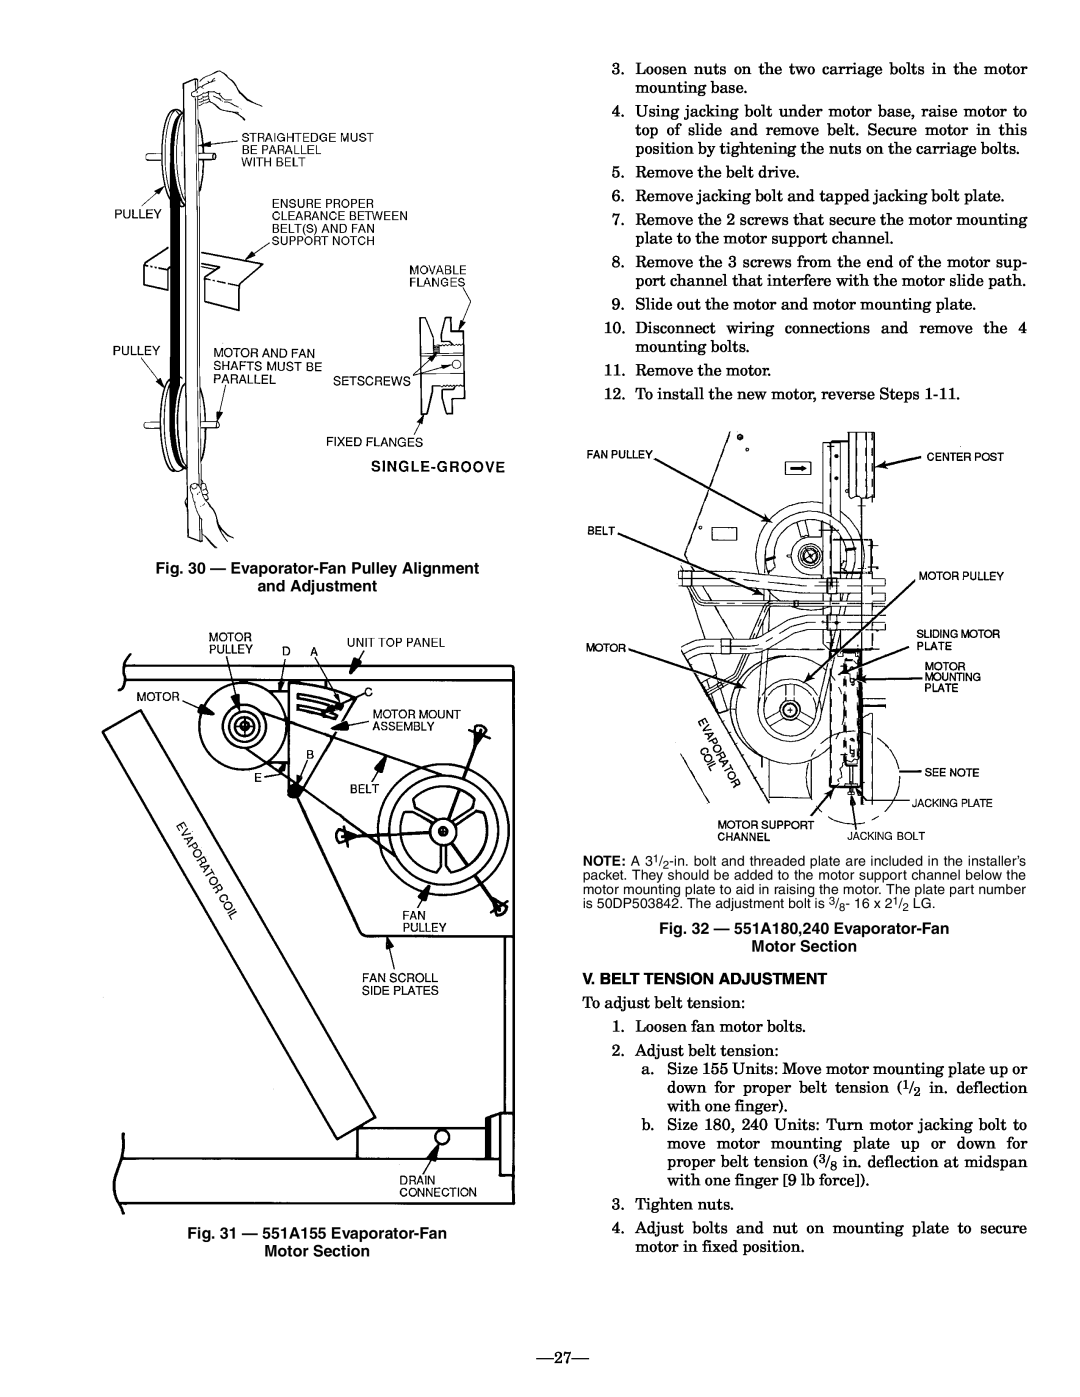 Bryant operation manual 27, Evaporator-FanPulley Alignment, and Adjustment, 551A155 Evaporator-Fan Motor Section 